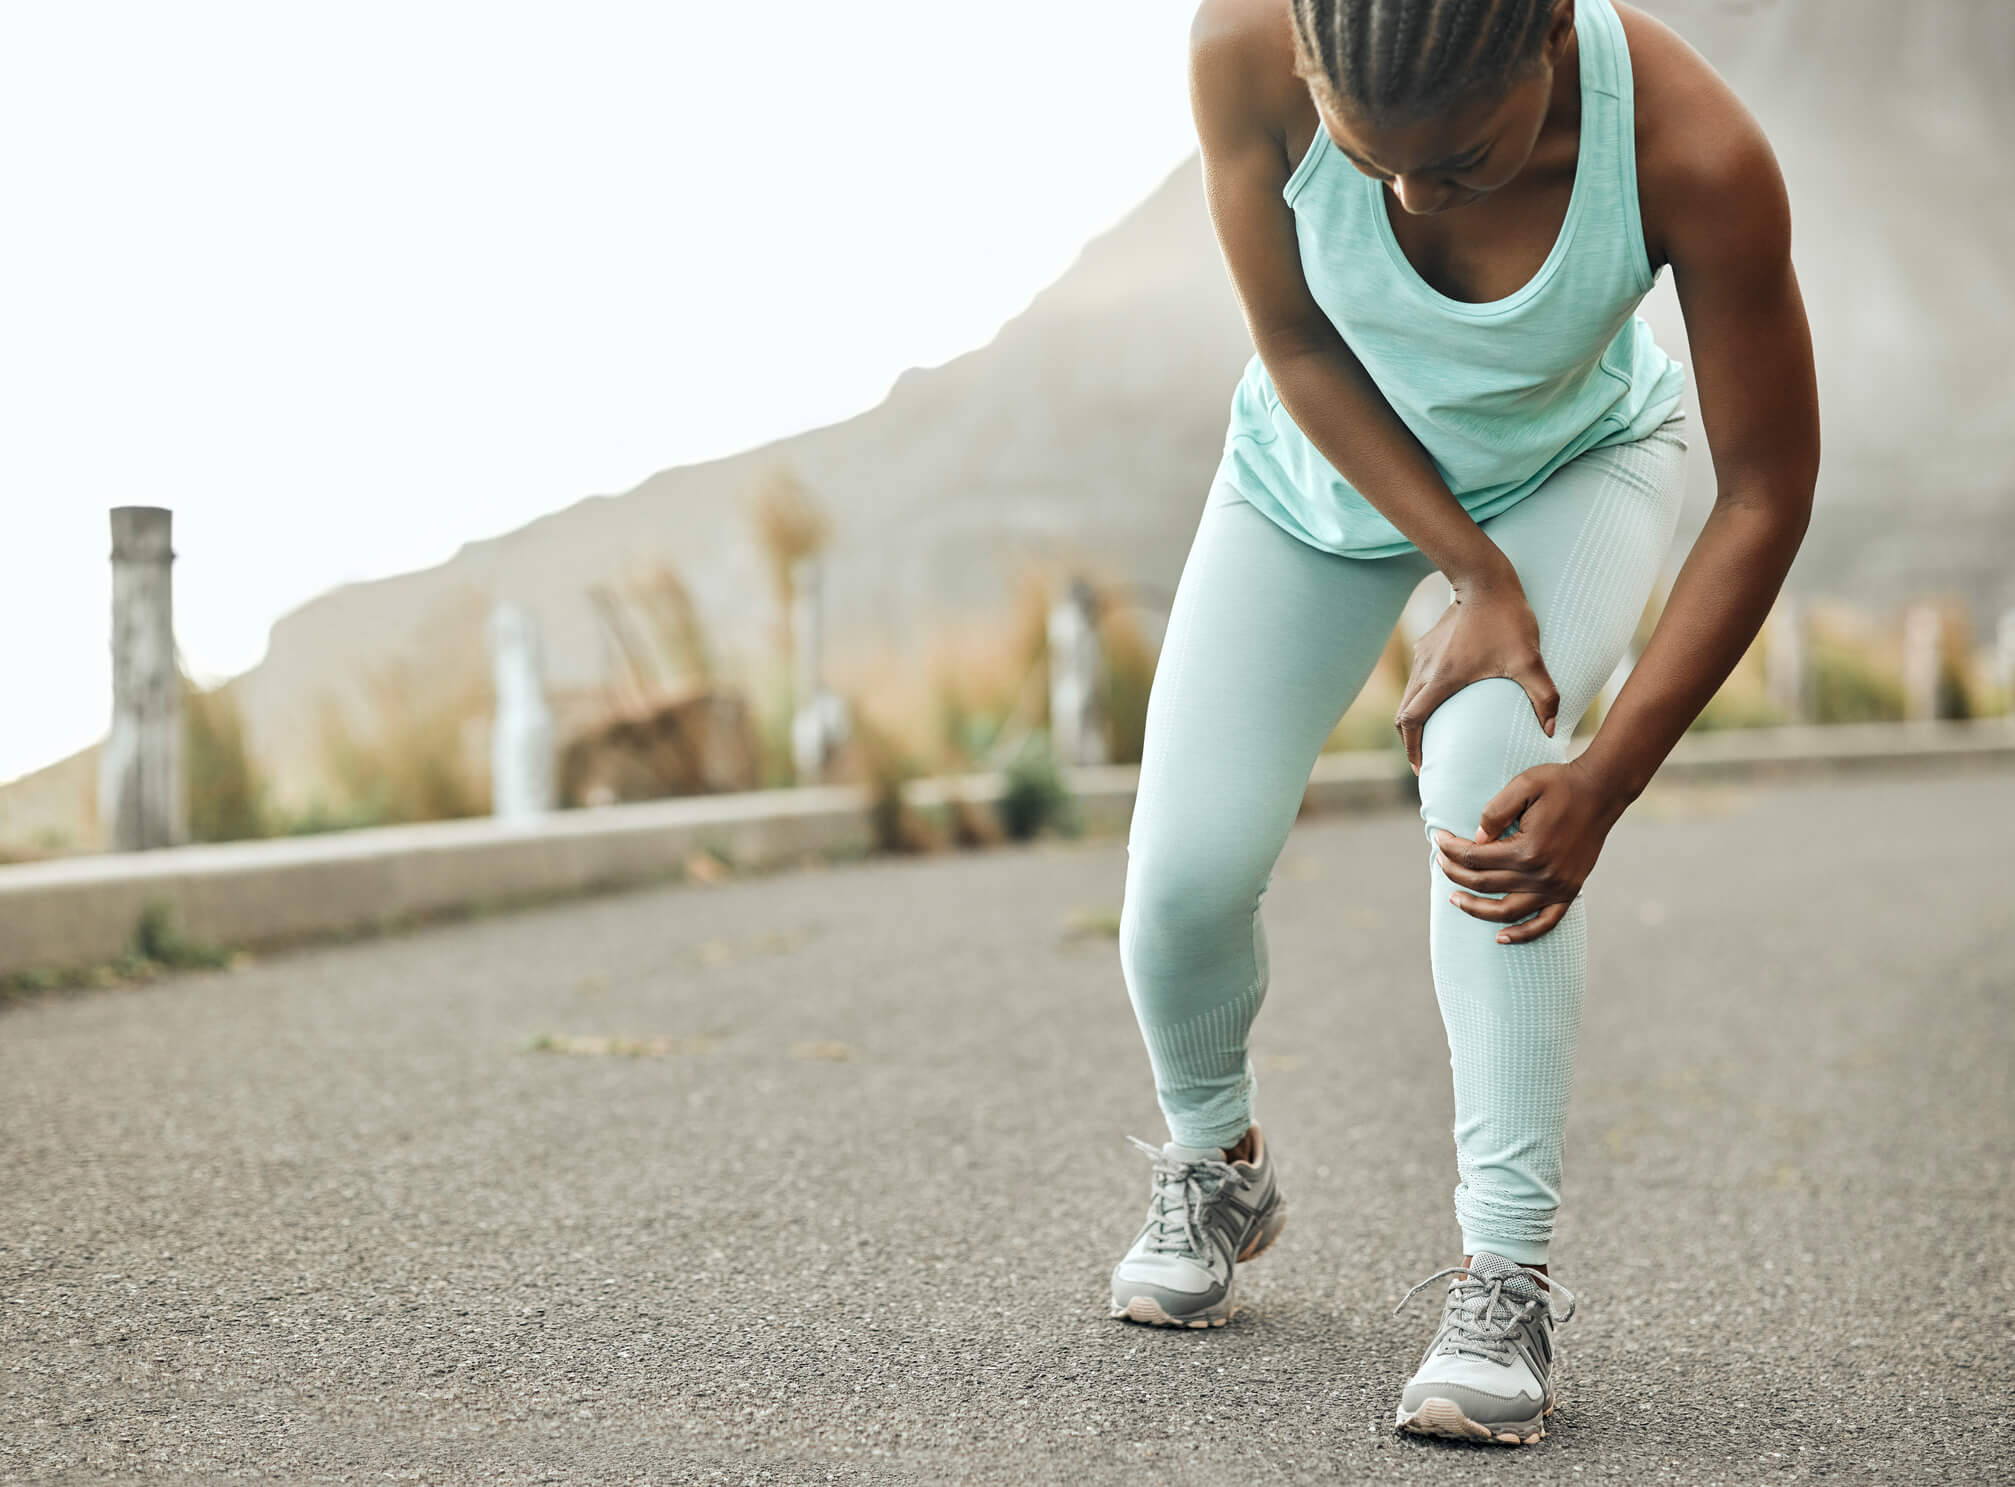 Top 3 Ways to Prevent IT Band Pain